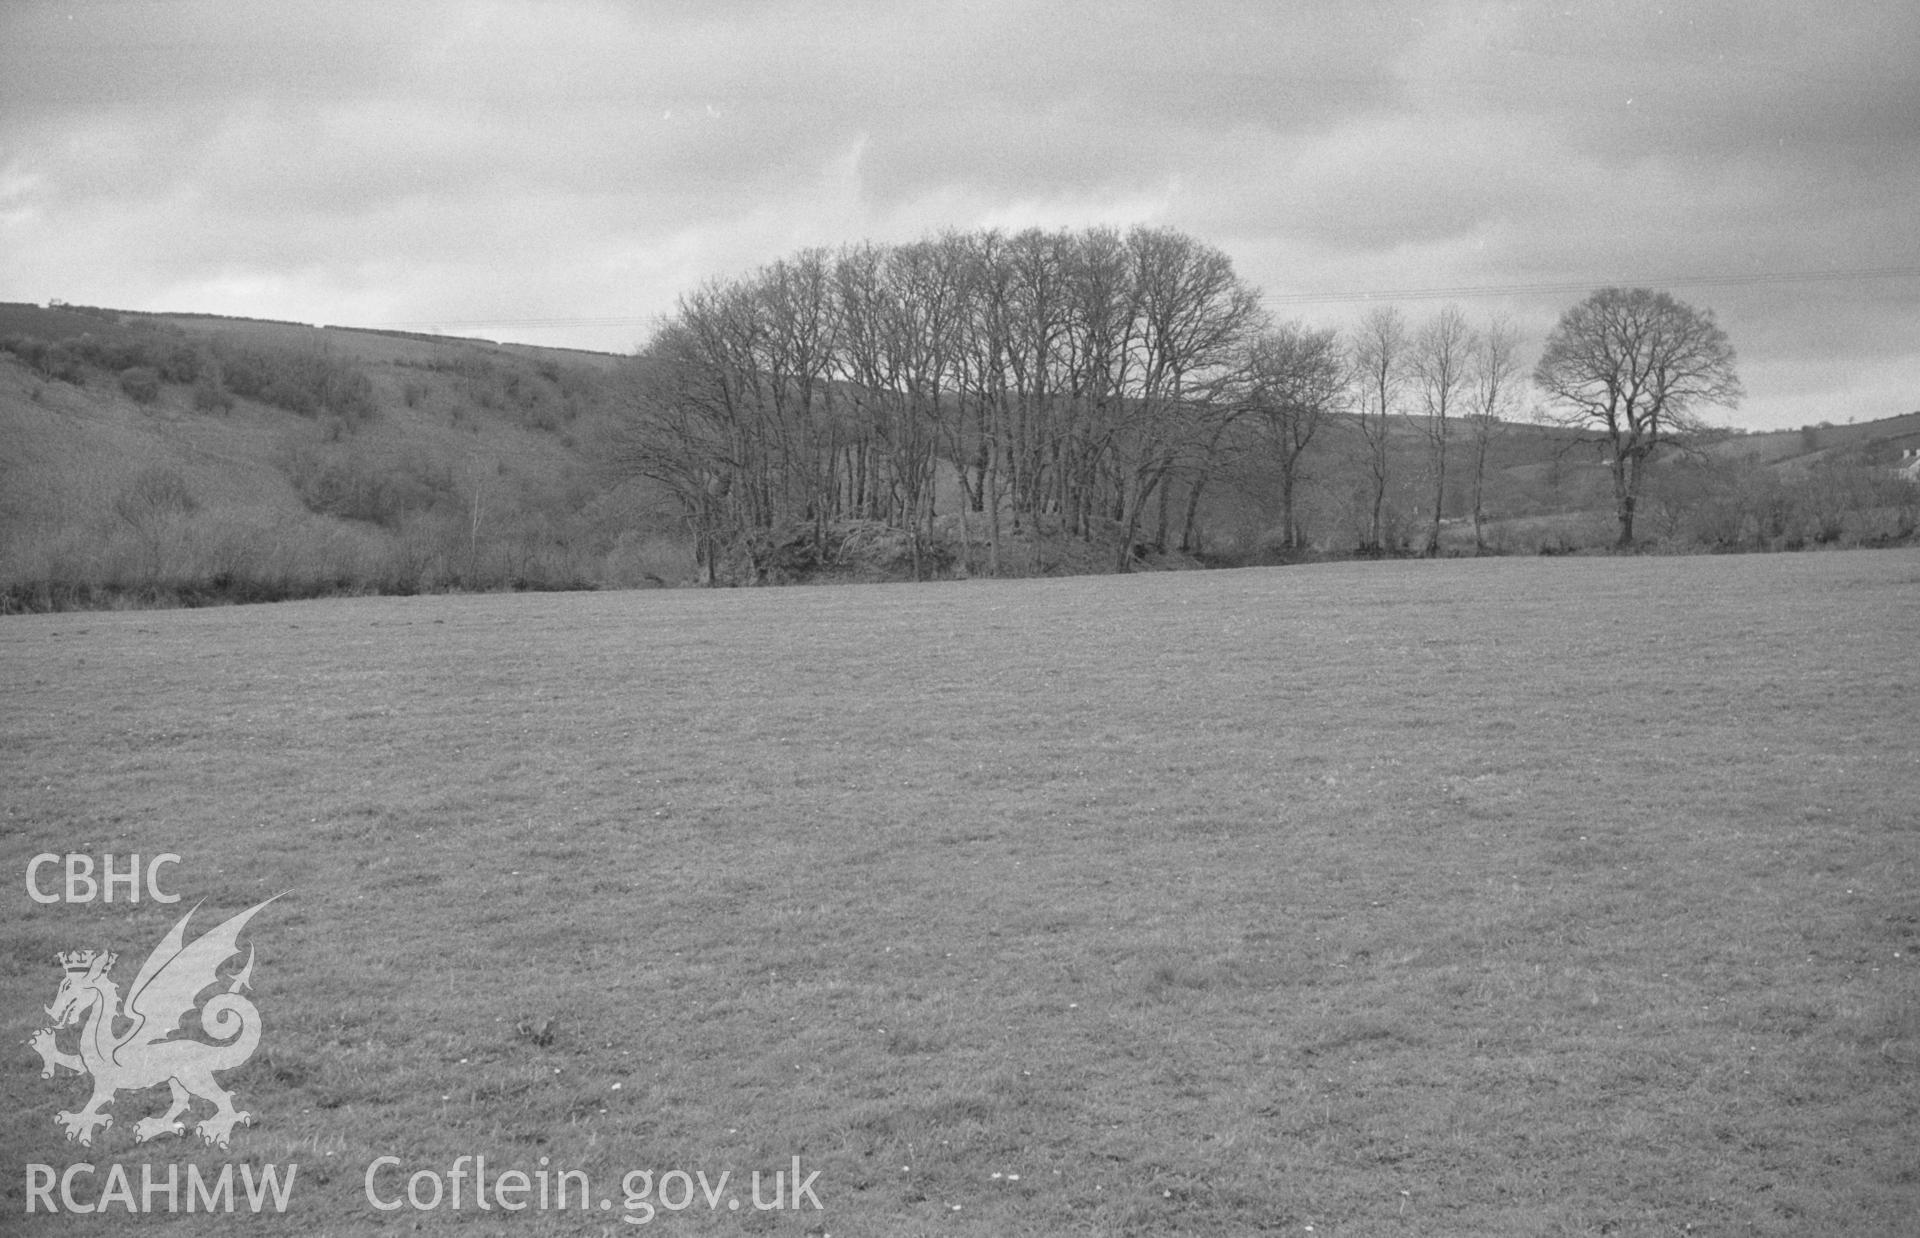 Digital copy of a black and white negative showing Castell Nant-y-Garan motted, covered in trees, seen from near the road in Llandyfriog. Photographed by Arthur O. Chater in April 1966 from Grid Reference SN 370 420, looking north north west.